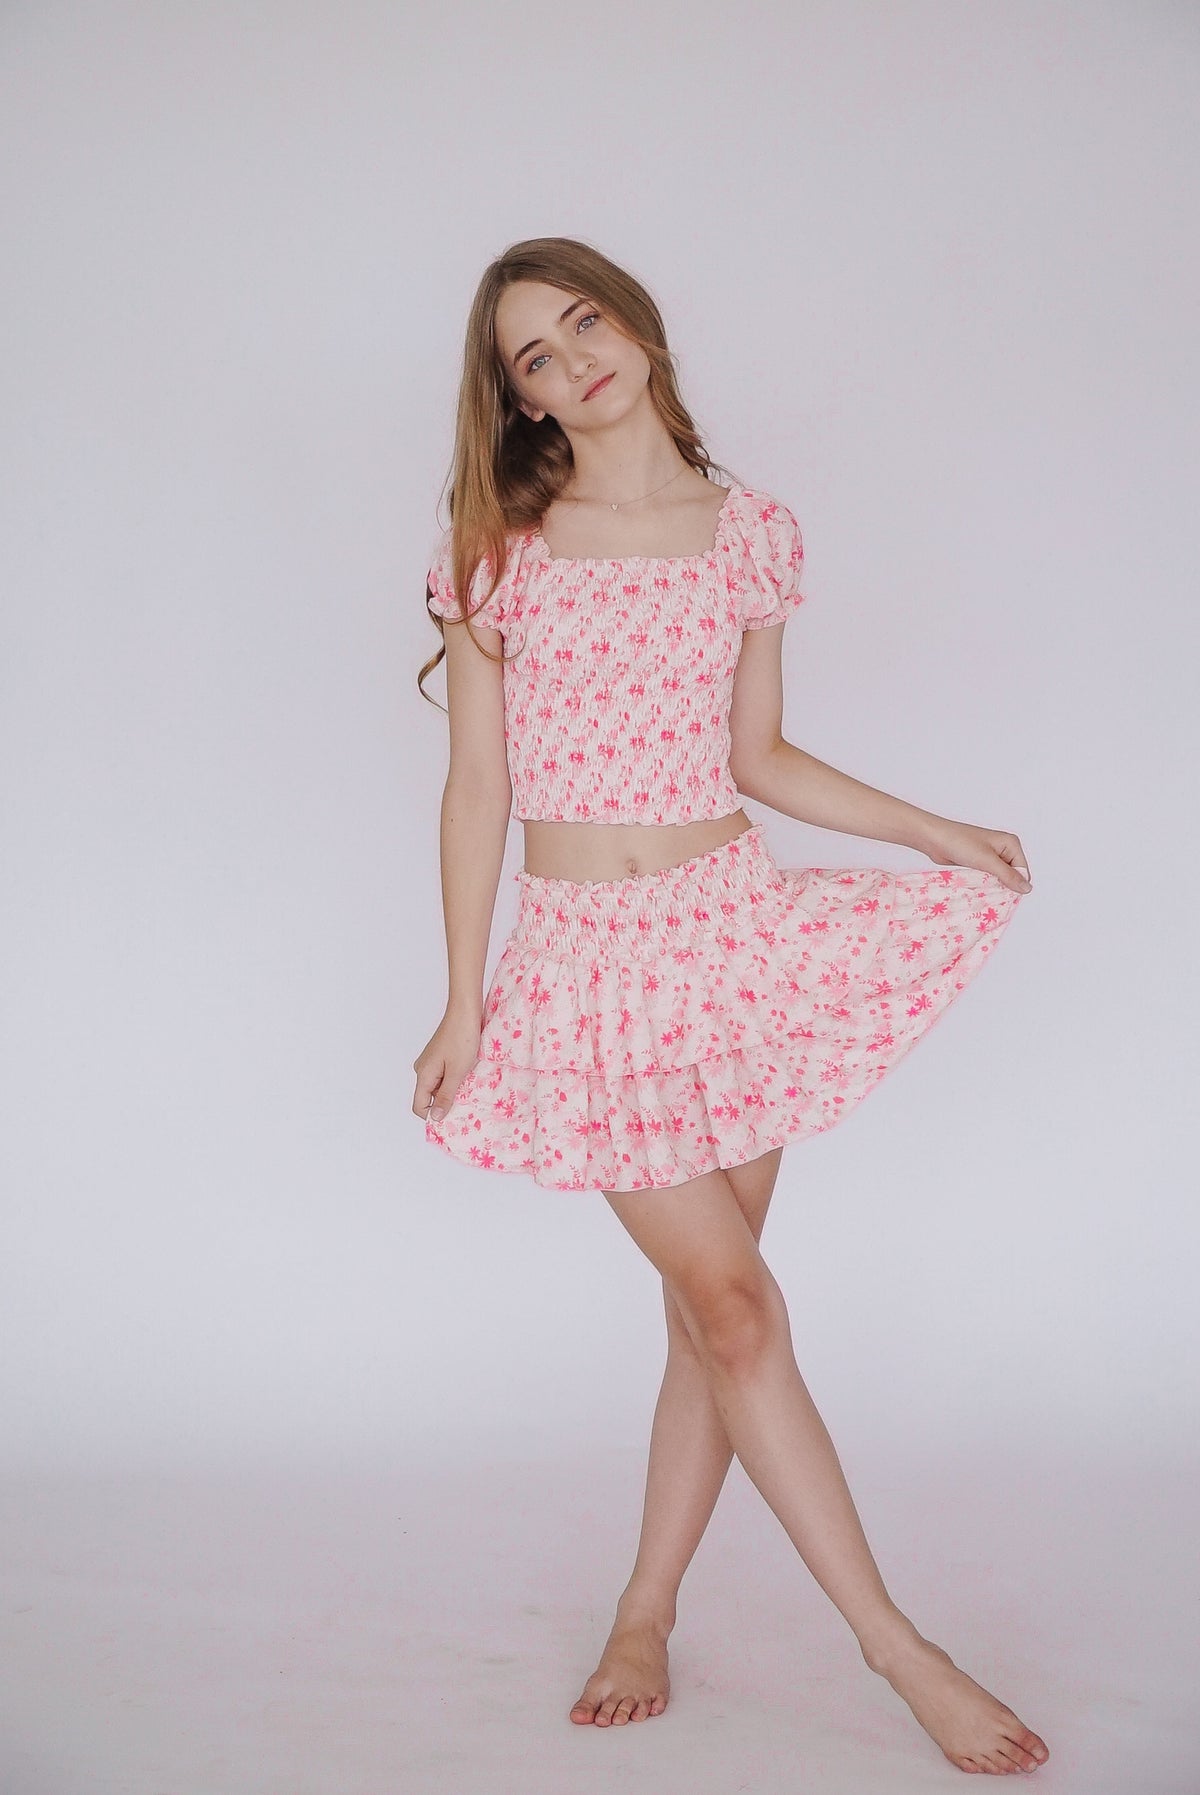 Flowers By Zoe - Girls - Pink Floral Twirl Skirt